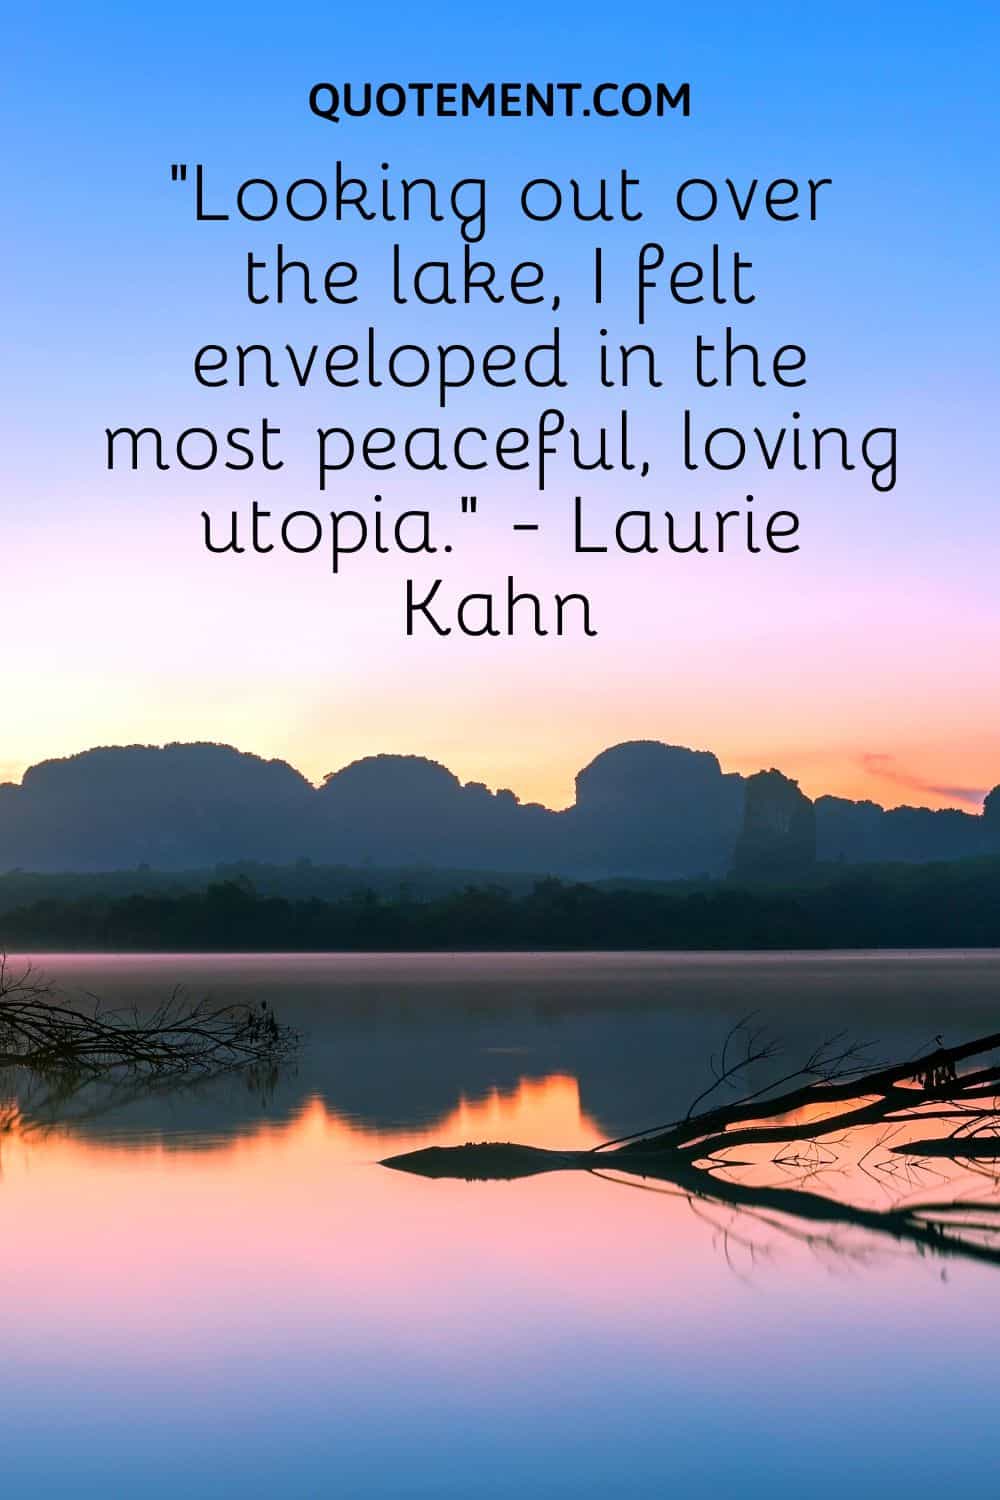 “Looking out over the lake, I felt enveloped in the most peaceful, loving utopia.” - Laurie Kahn